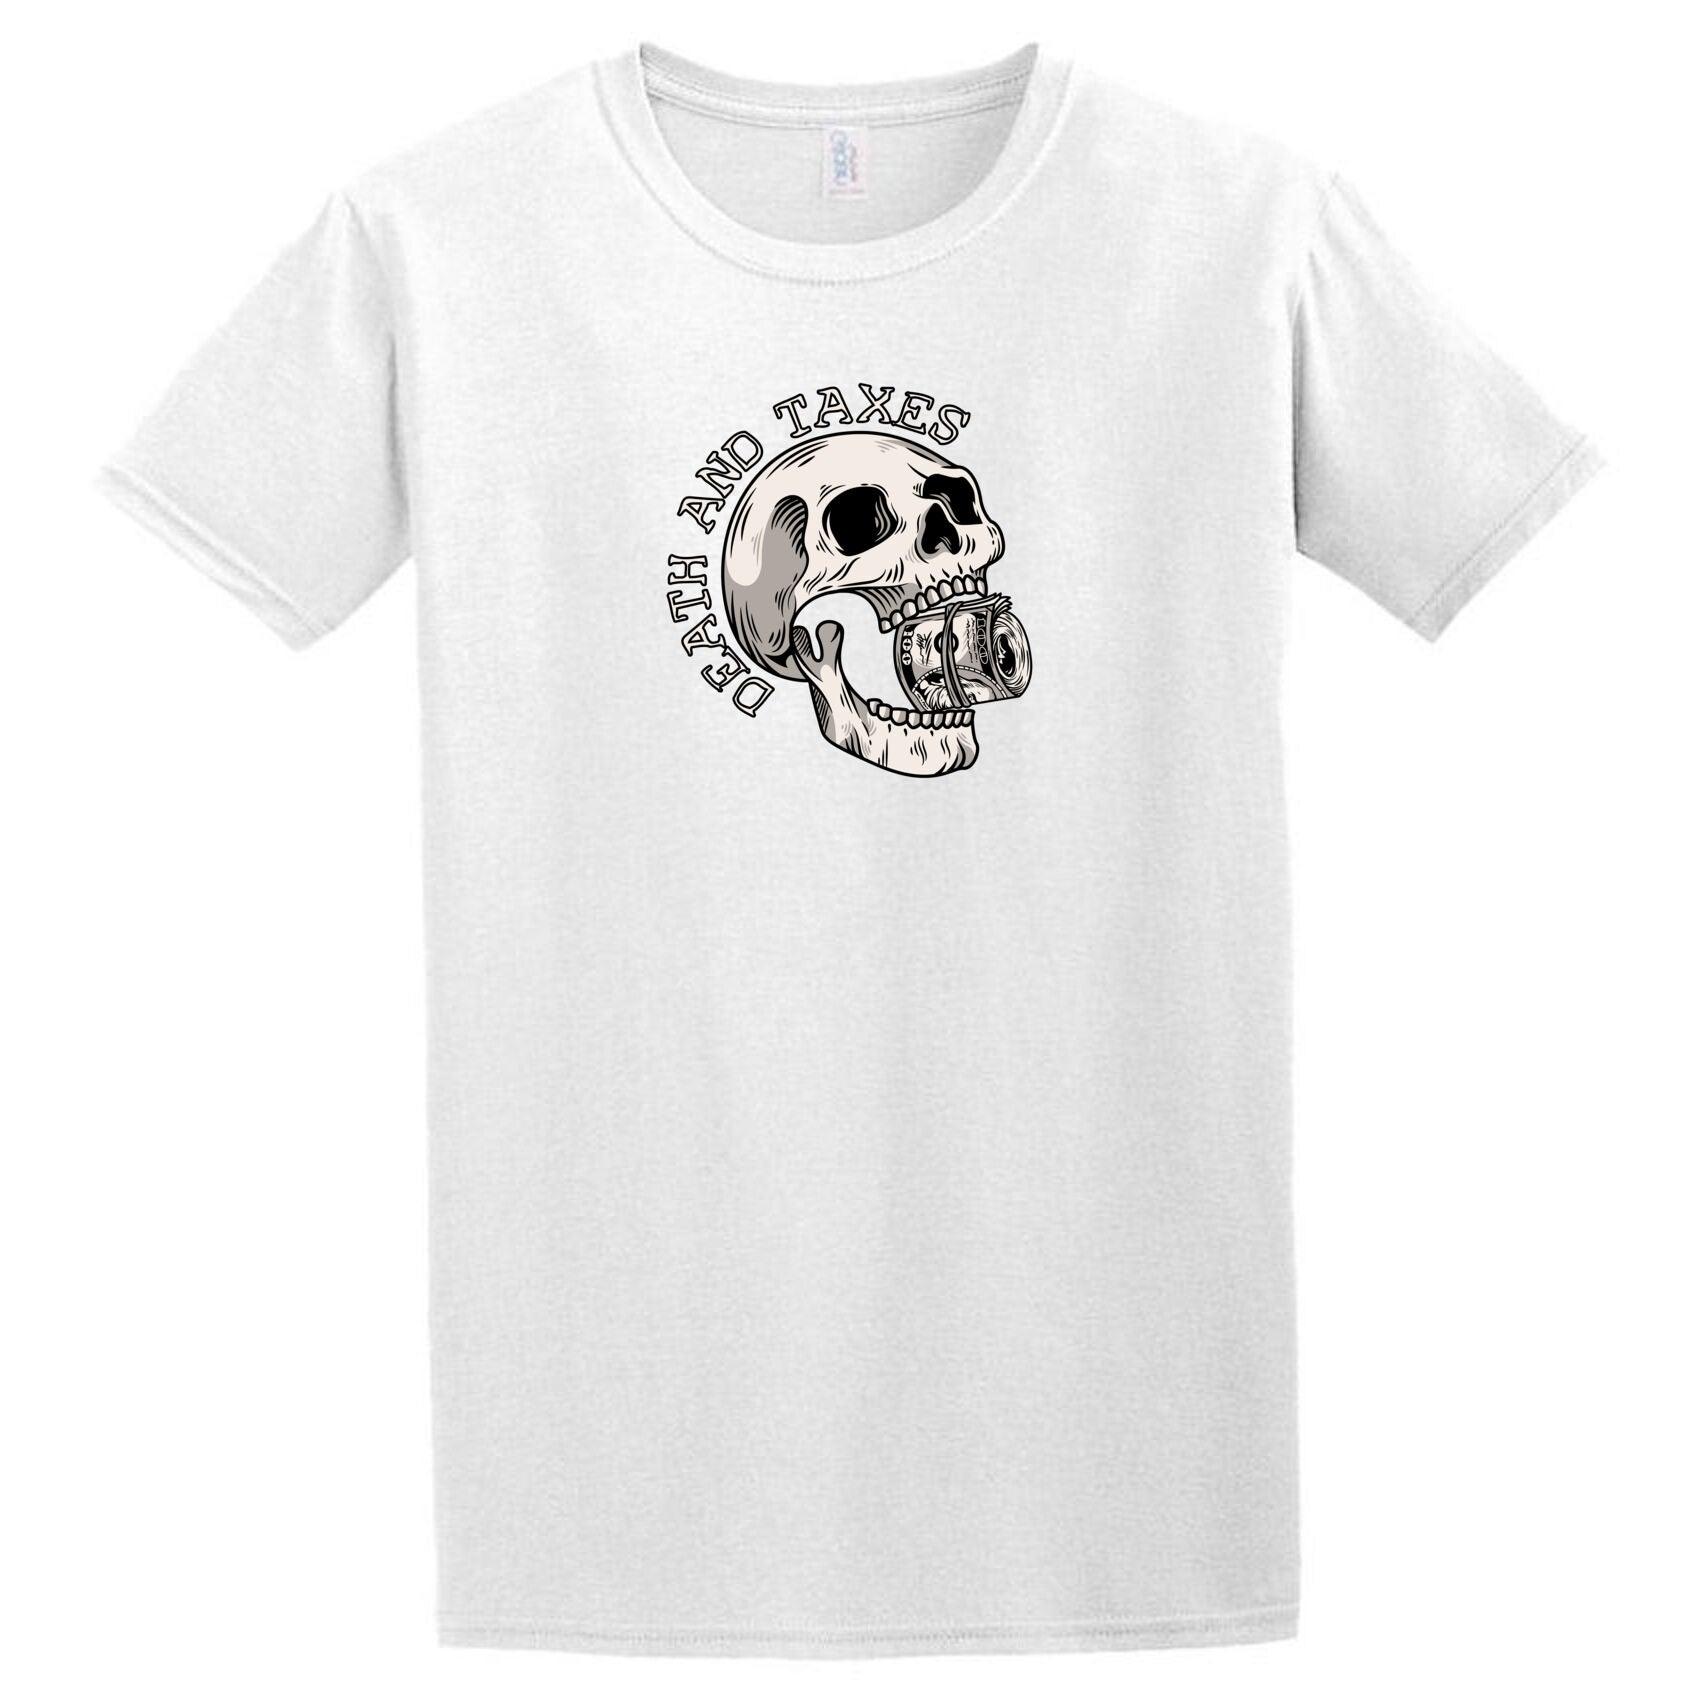 A Death And Taxes T-Shirt by Twisted Gifts with a skull on it.